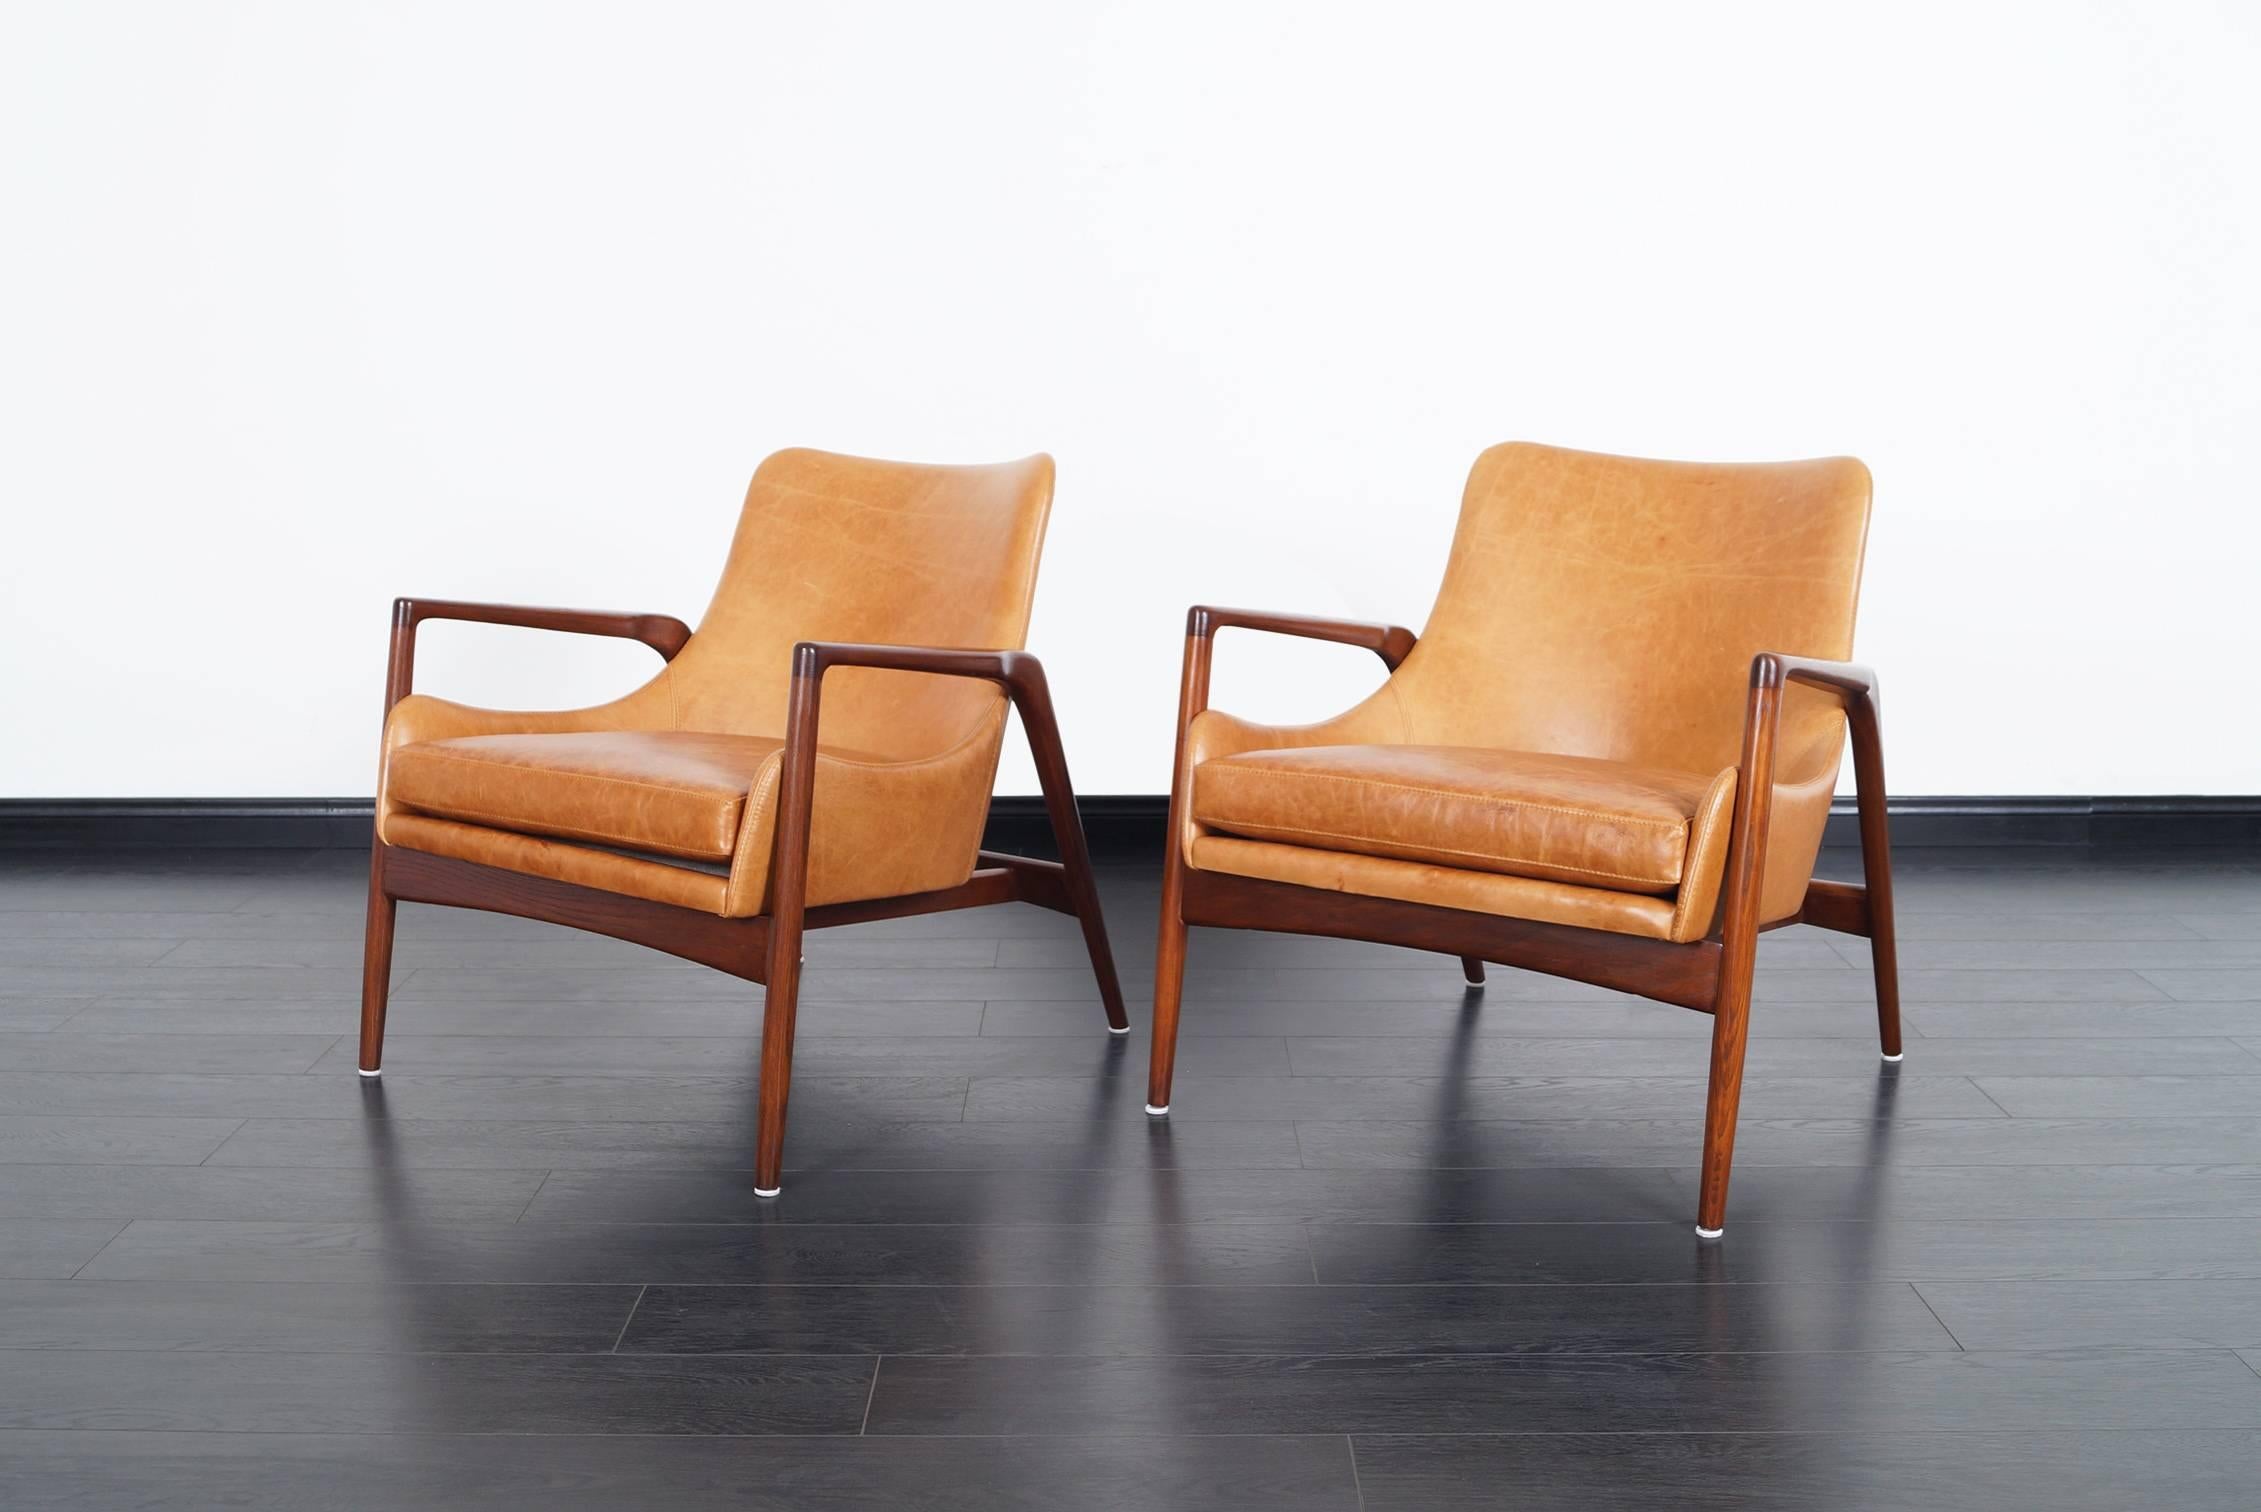 Stunning pair of Danish leather lounge chairs designed by Ib Kofod Larsen. The way the leather shell seems to be floating inside the wooden frame, gives the design an amazing feel from every angle.